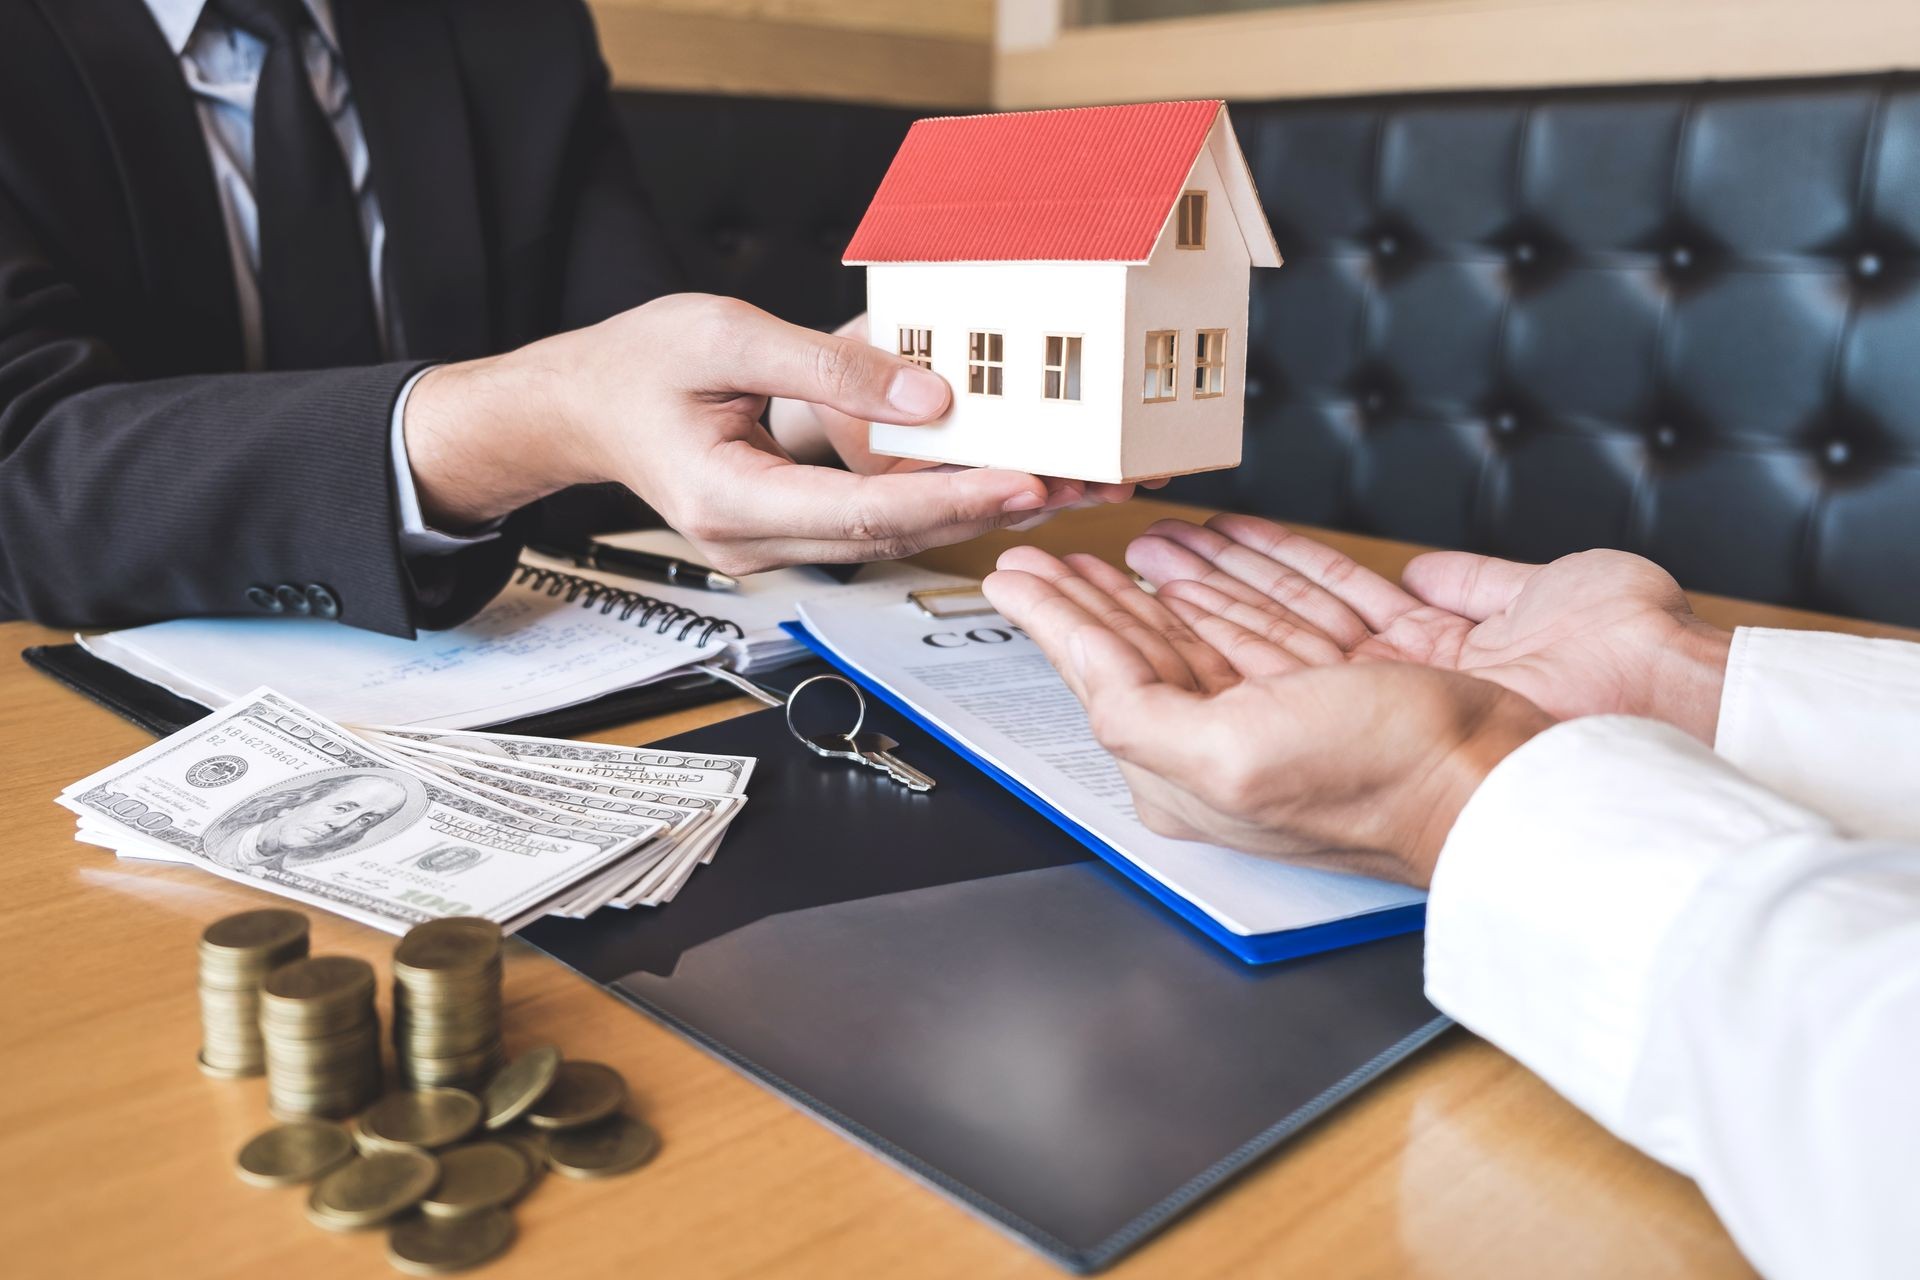 Estate agent sending house model to client after signing agreement contract real estate with approved mortgage application form, concerning mortgage loan offer for and house insurance.